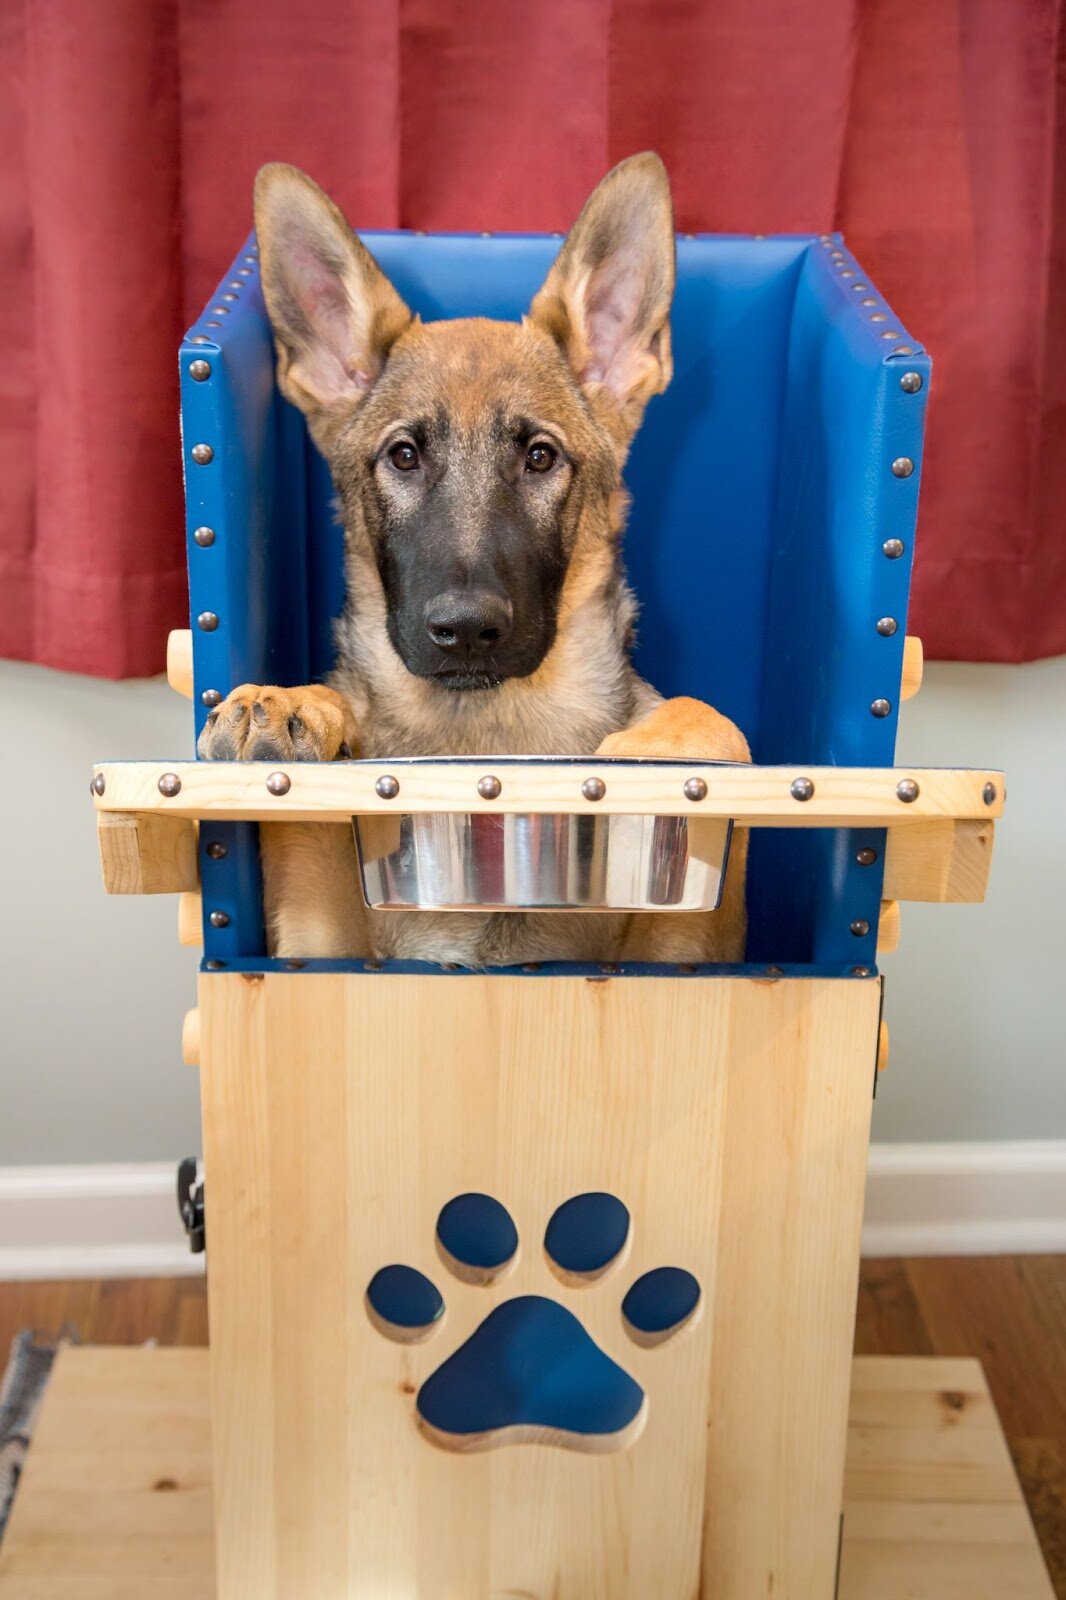 Why do some dogs need high chairs, and how can genetics help?